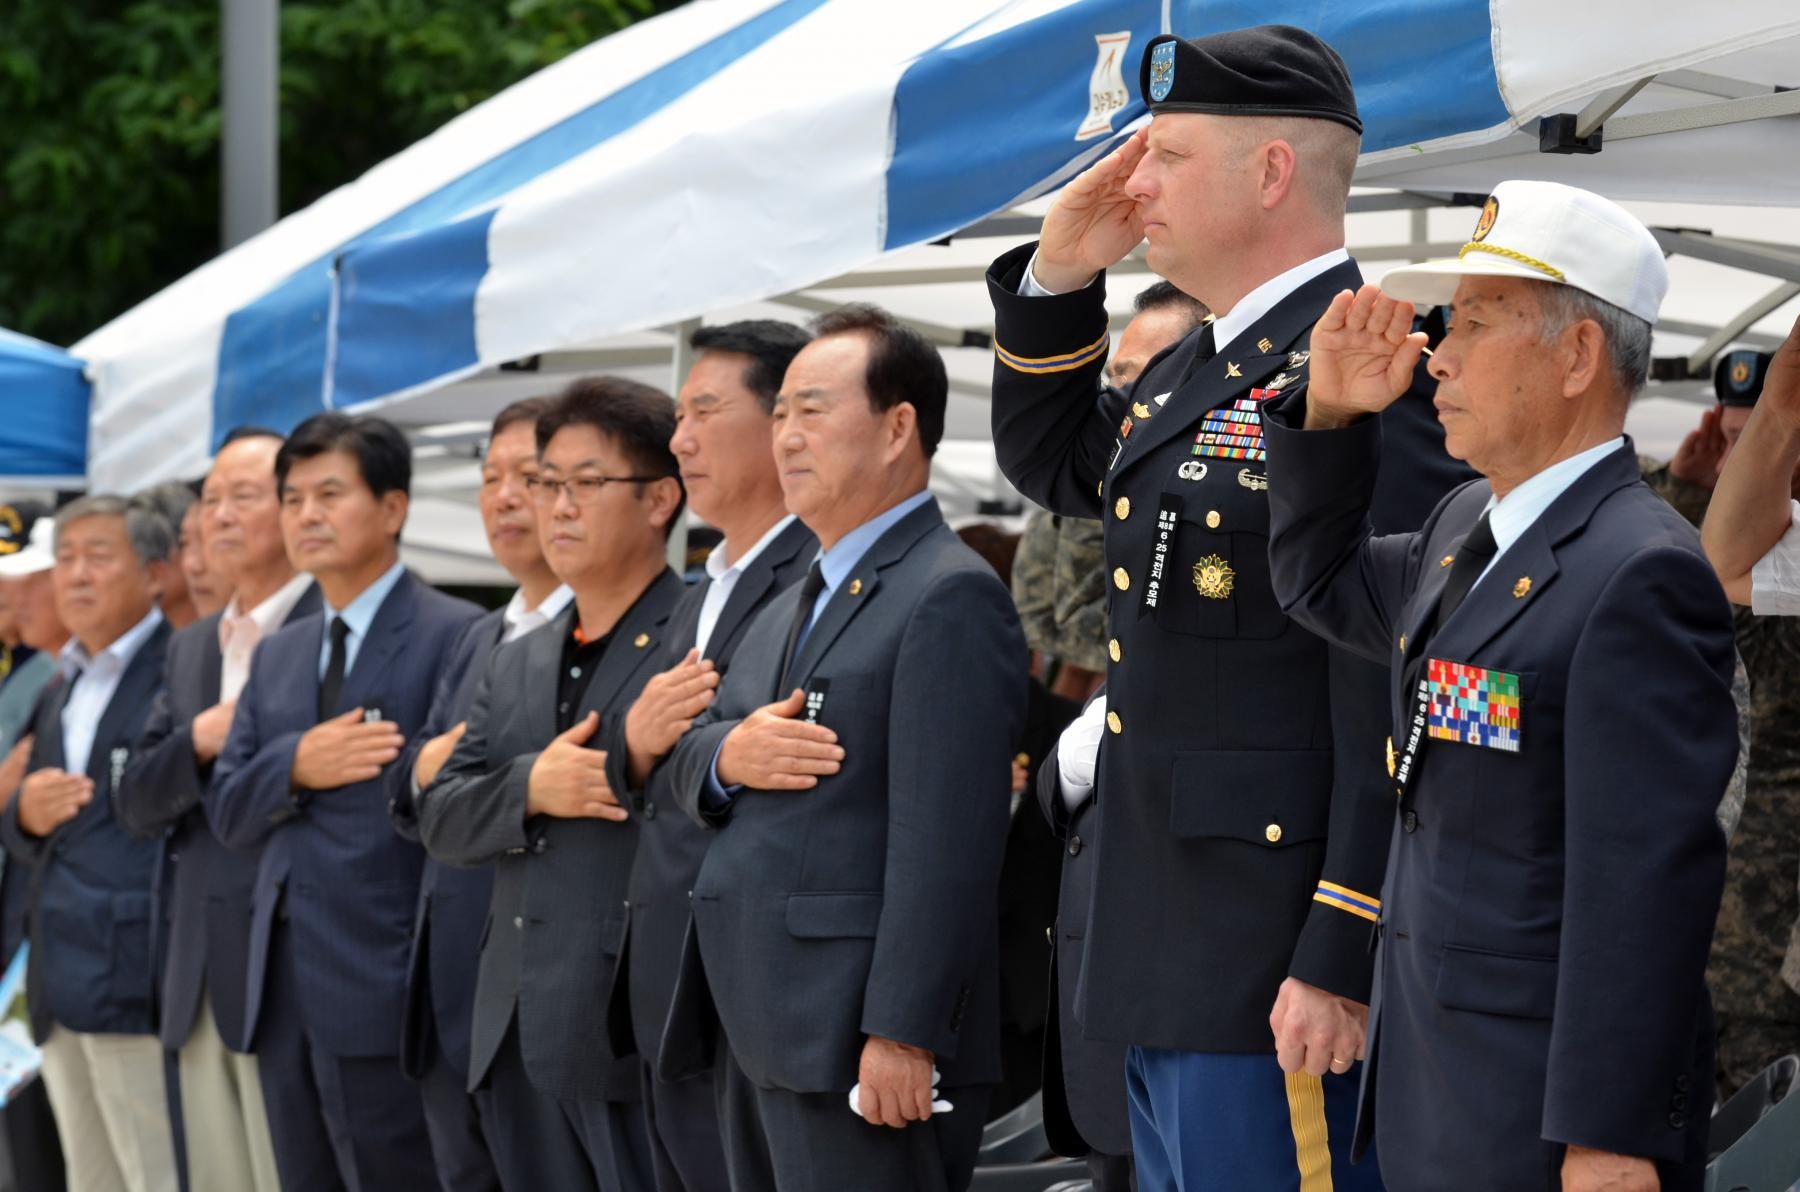 Soldiers' Korean War sacrifices honored | Article | The United States Army